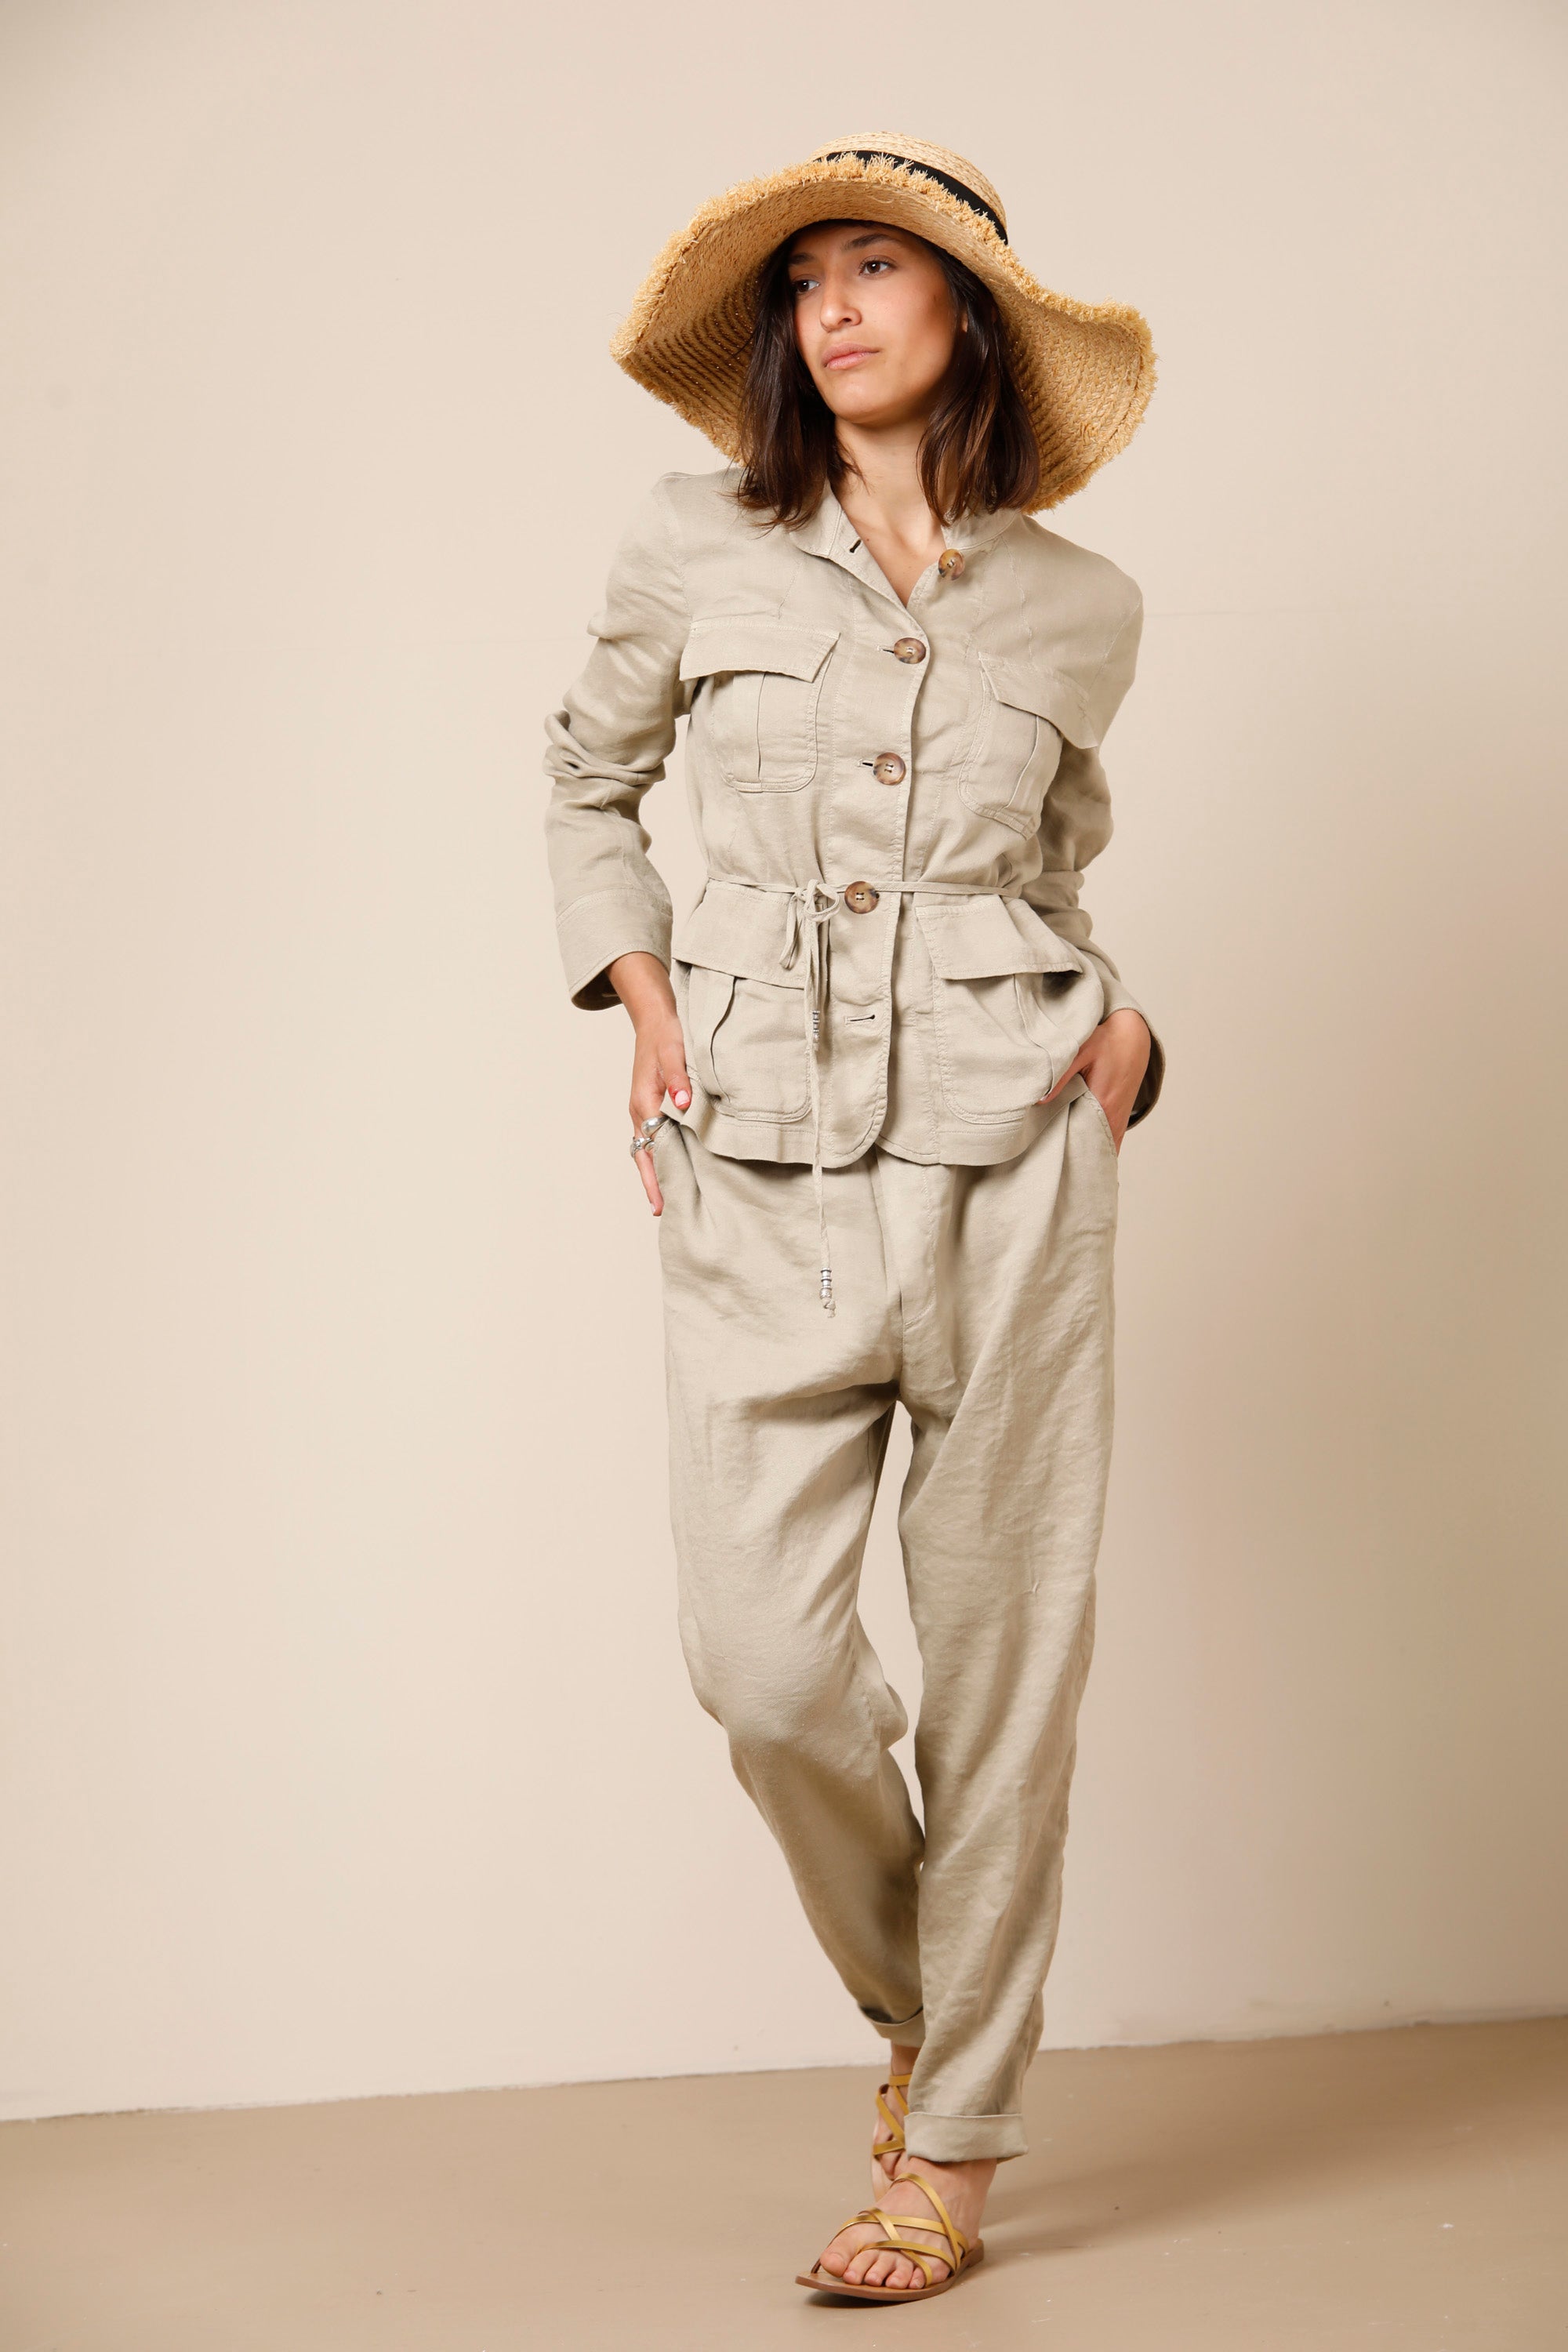 Karen women's field jacket in linen and viscose with large pockets